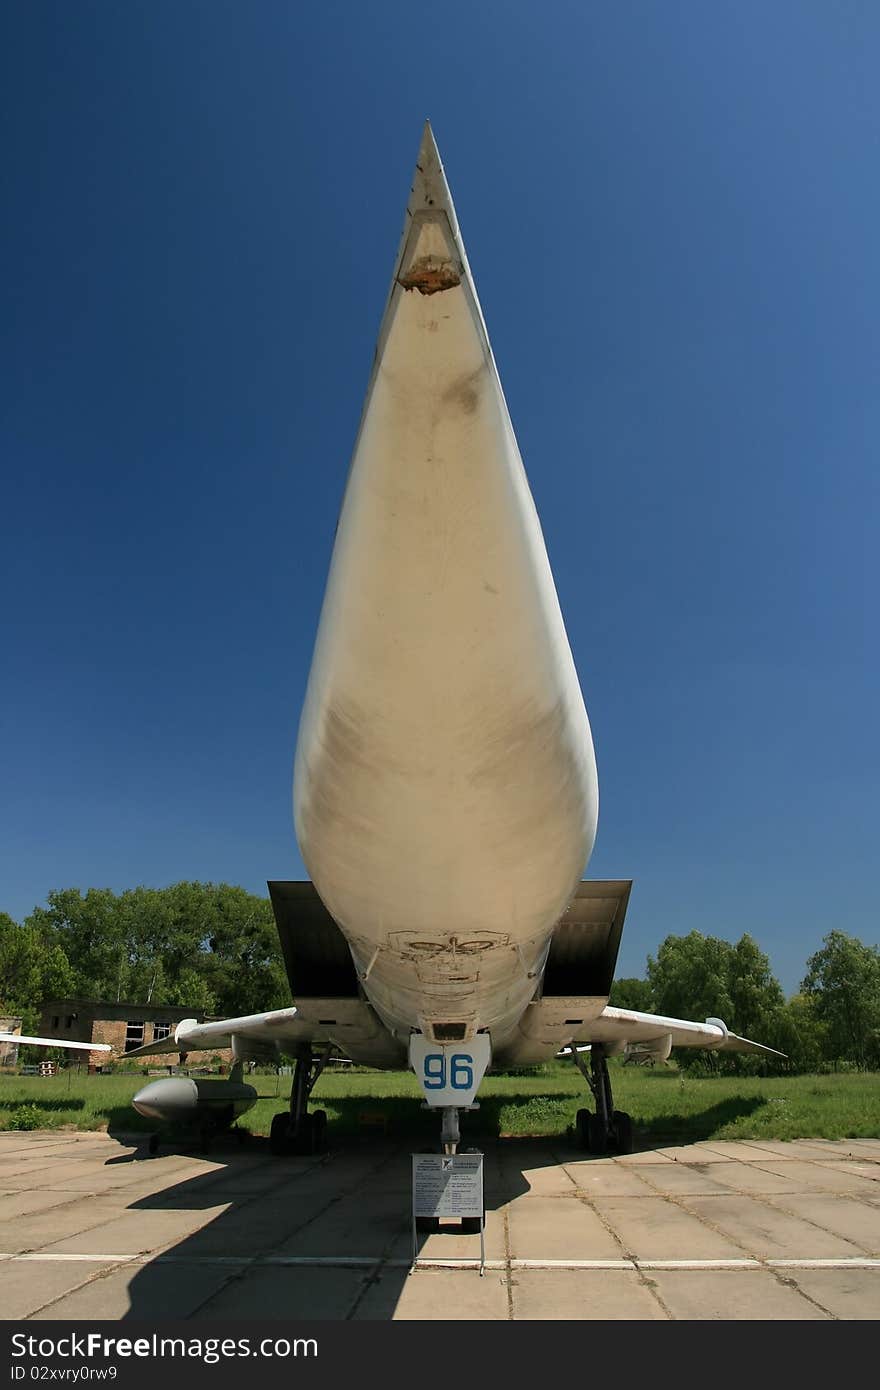 Nose piece of a Tu 22 Soviet nuclear bomber. Nose piece of a Tu 22 Soviet nuclear bomber